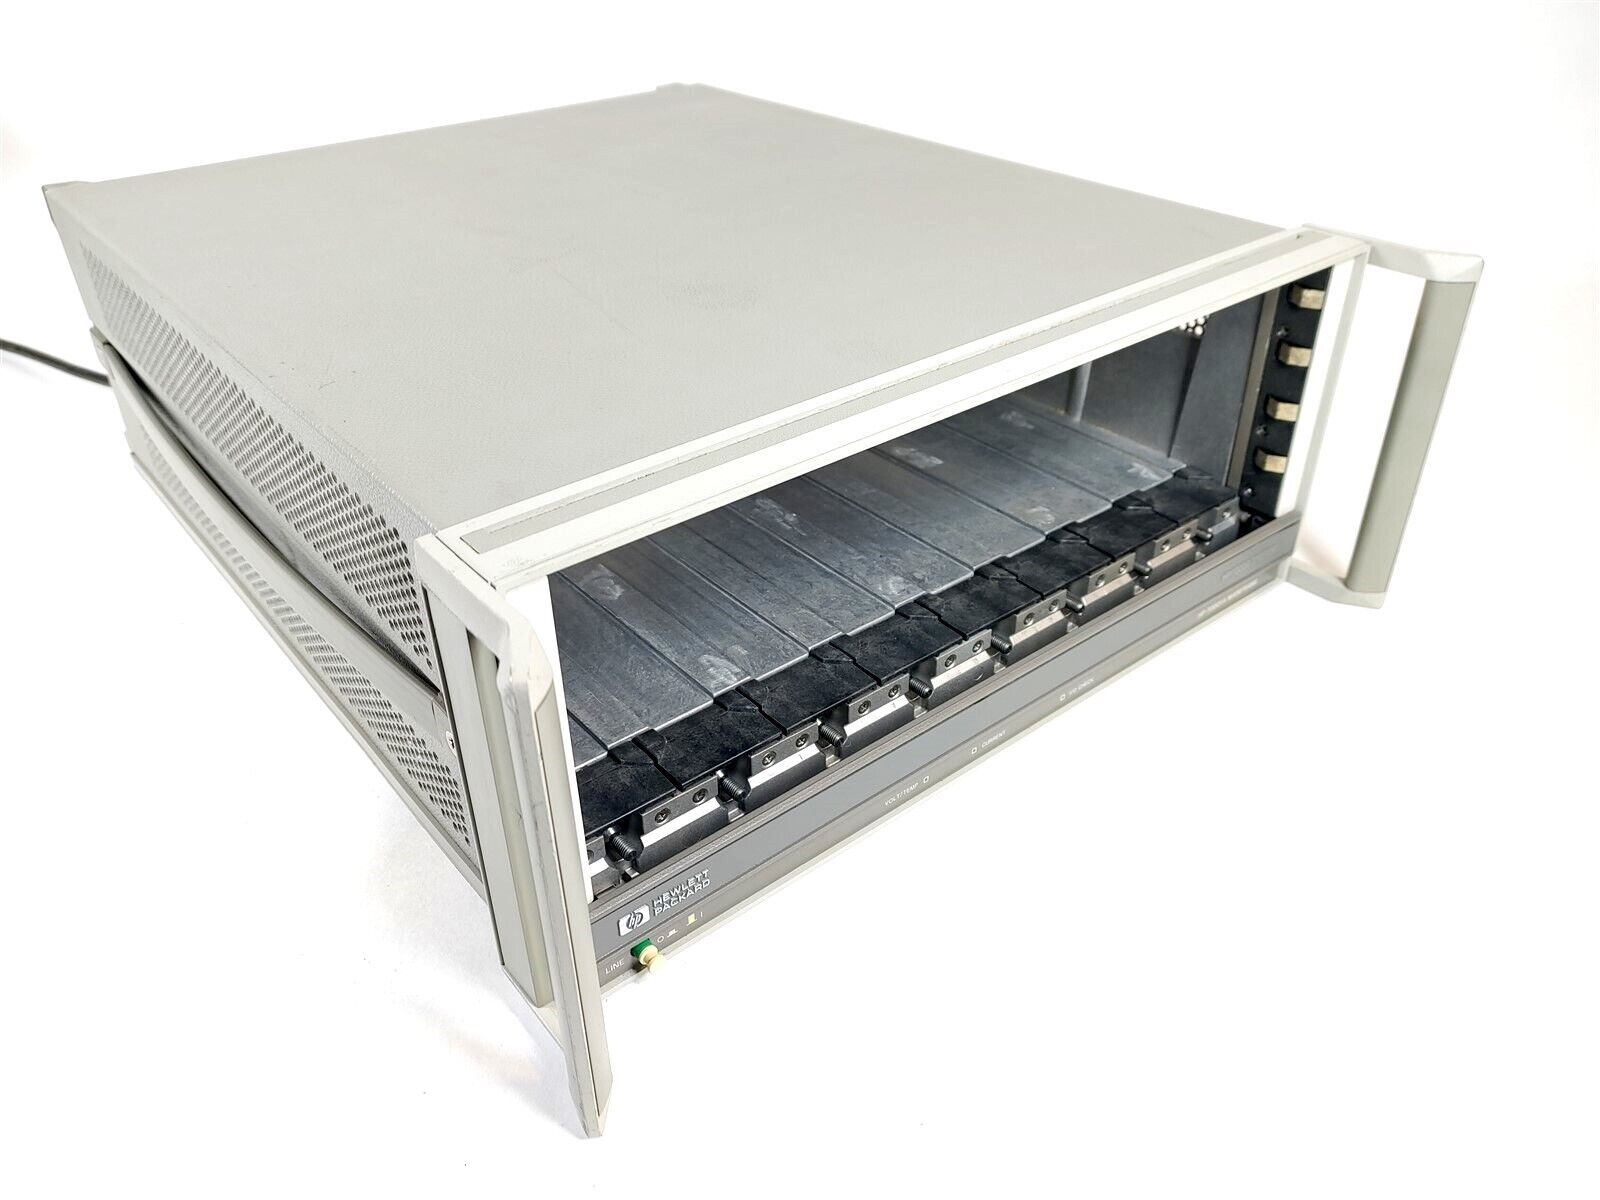 Hewlett Packard HP 70001A Mainframe Chassis Industrial Unit HP70000 System 